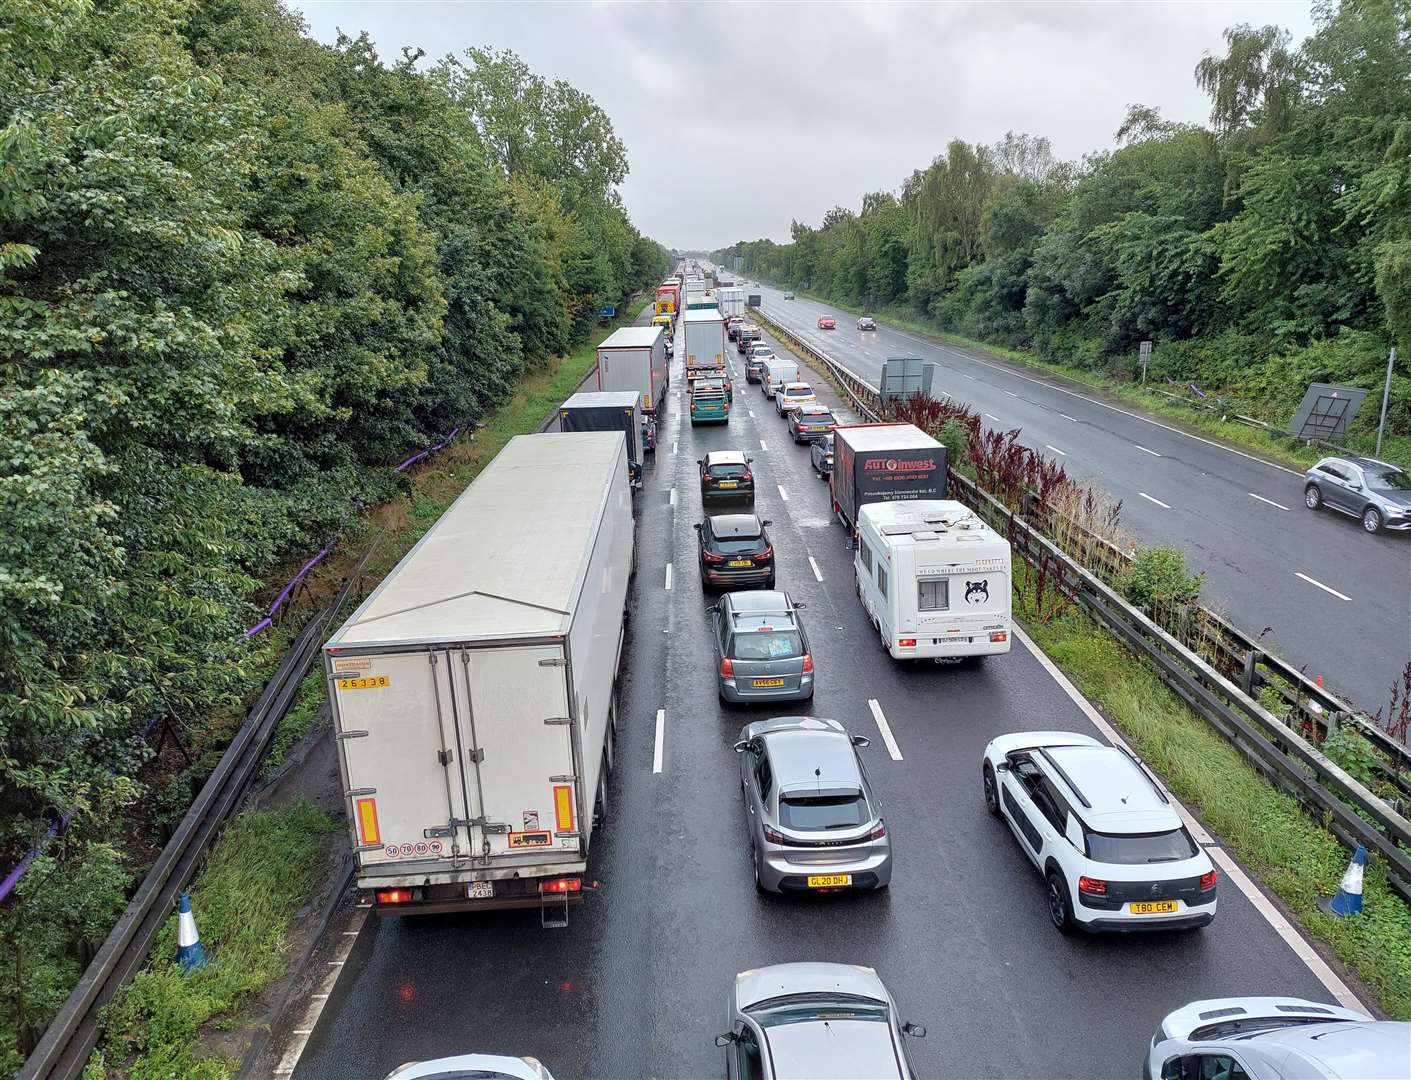 Traffic is backing up on the M20